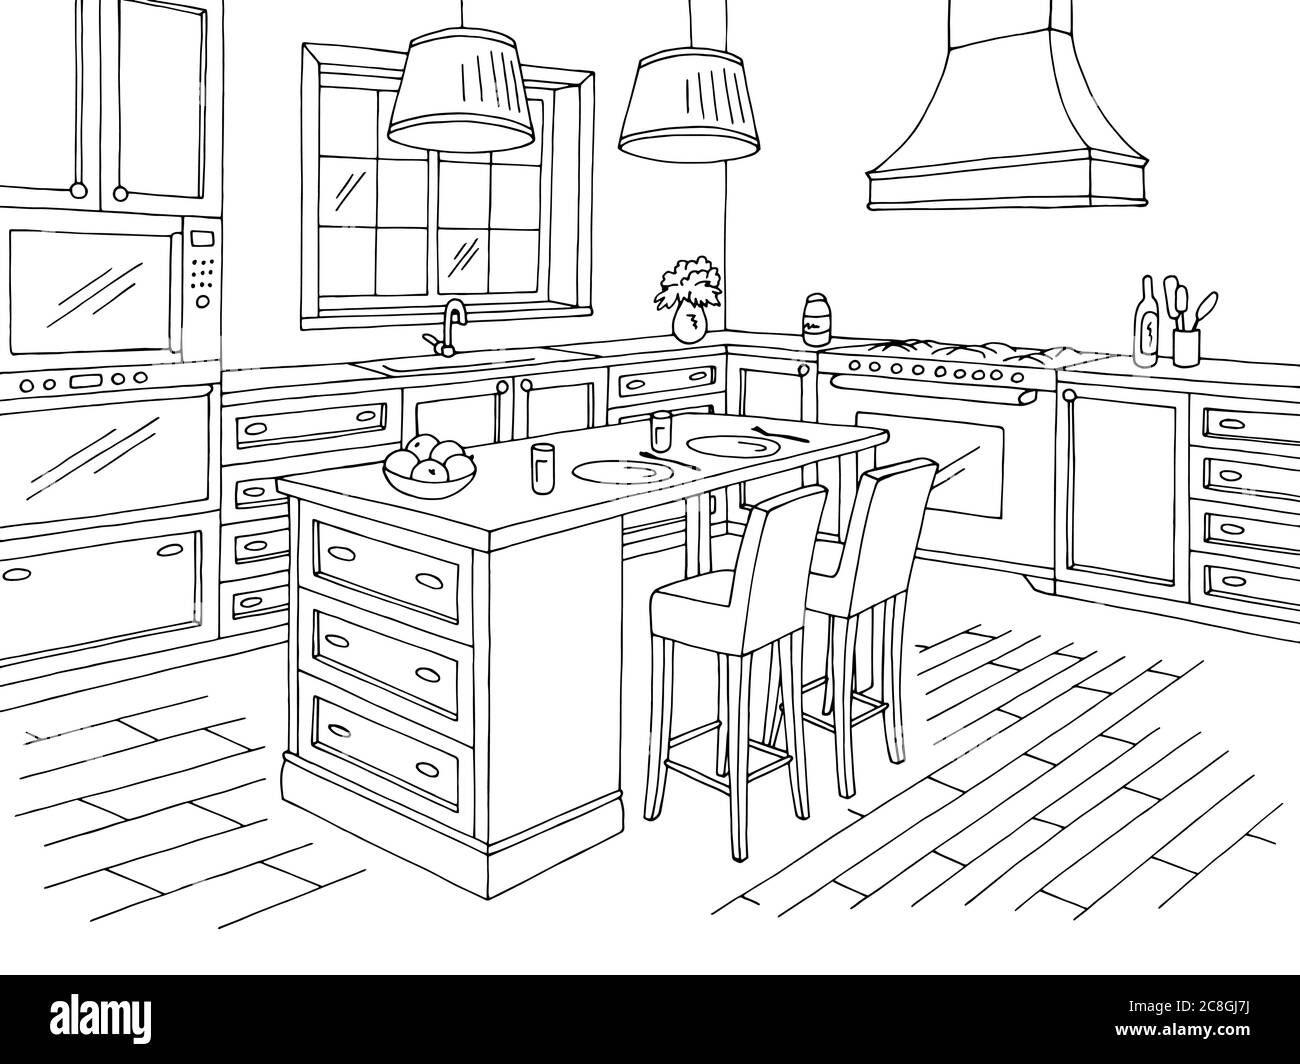 Kitchen Room Graphic Black White Home Interior Sketch Illustration Vector  Royalty Free SVG, Cliparts, Vectors, and Stock Illustration. Image  133292906.